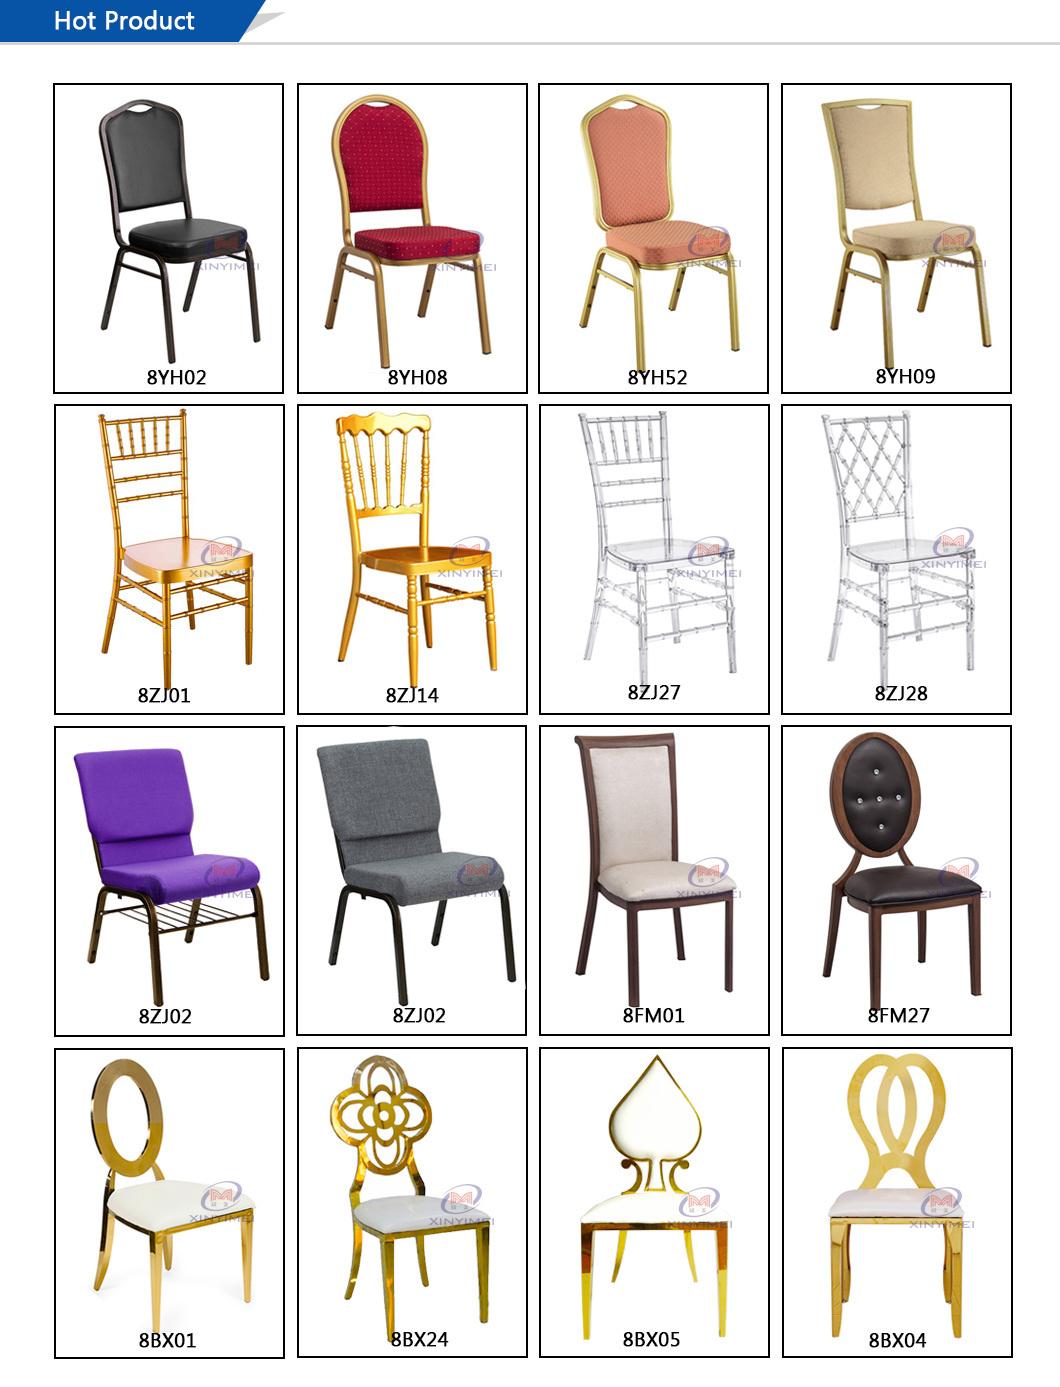 Wholesale High Quality Folding Chairs Outdoor Use